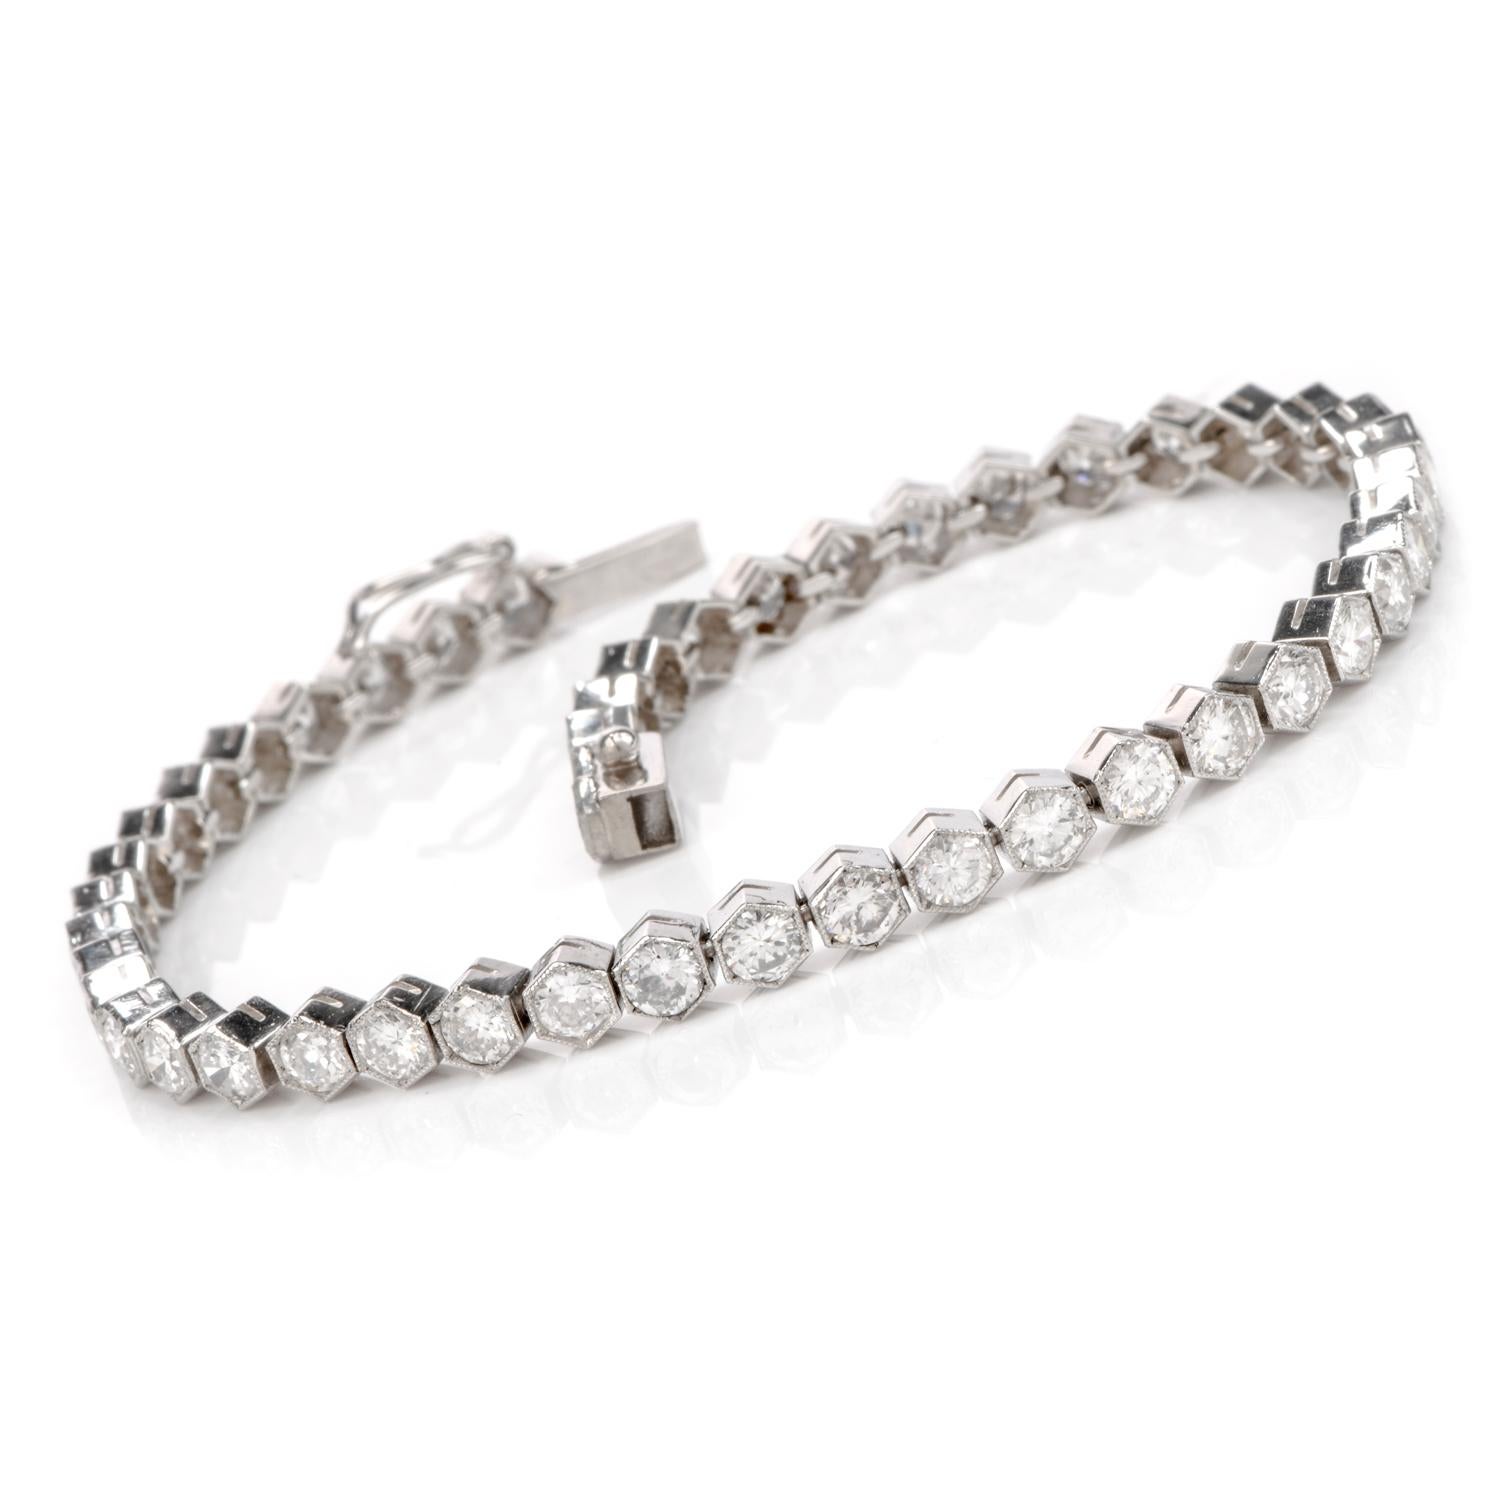 This glistening bracelet was inspired in a geometric repeat

And crafted in luxurious Platinum.

This classic antique style line tennis bracelet design is the host for 48 hand-matched,

bezel set diamonds.  Each bezel contains hand-applied